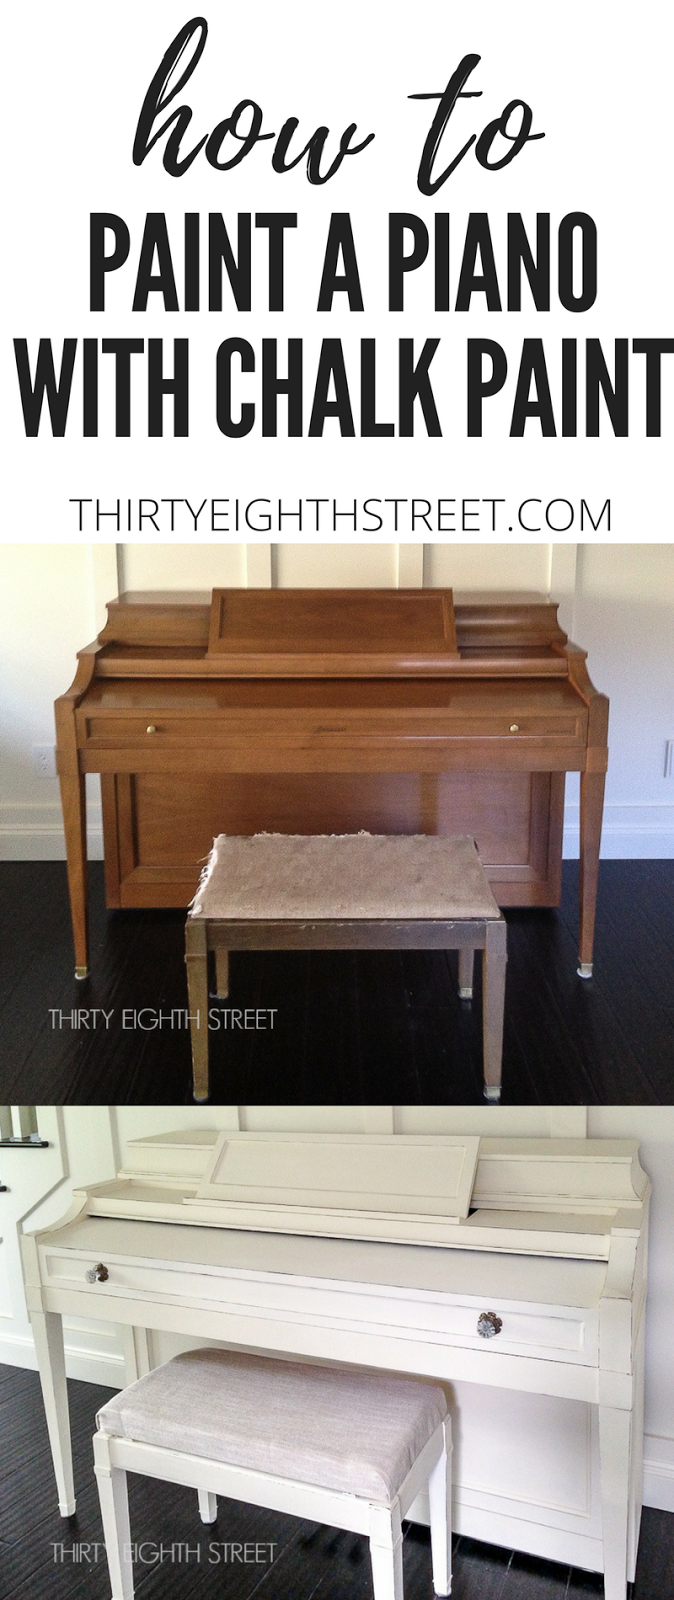 white painted pianos, chalk paint piano, painting piano, piano painting, piano paint, painting a piano, paint a piano, paint piano,